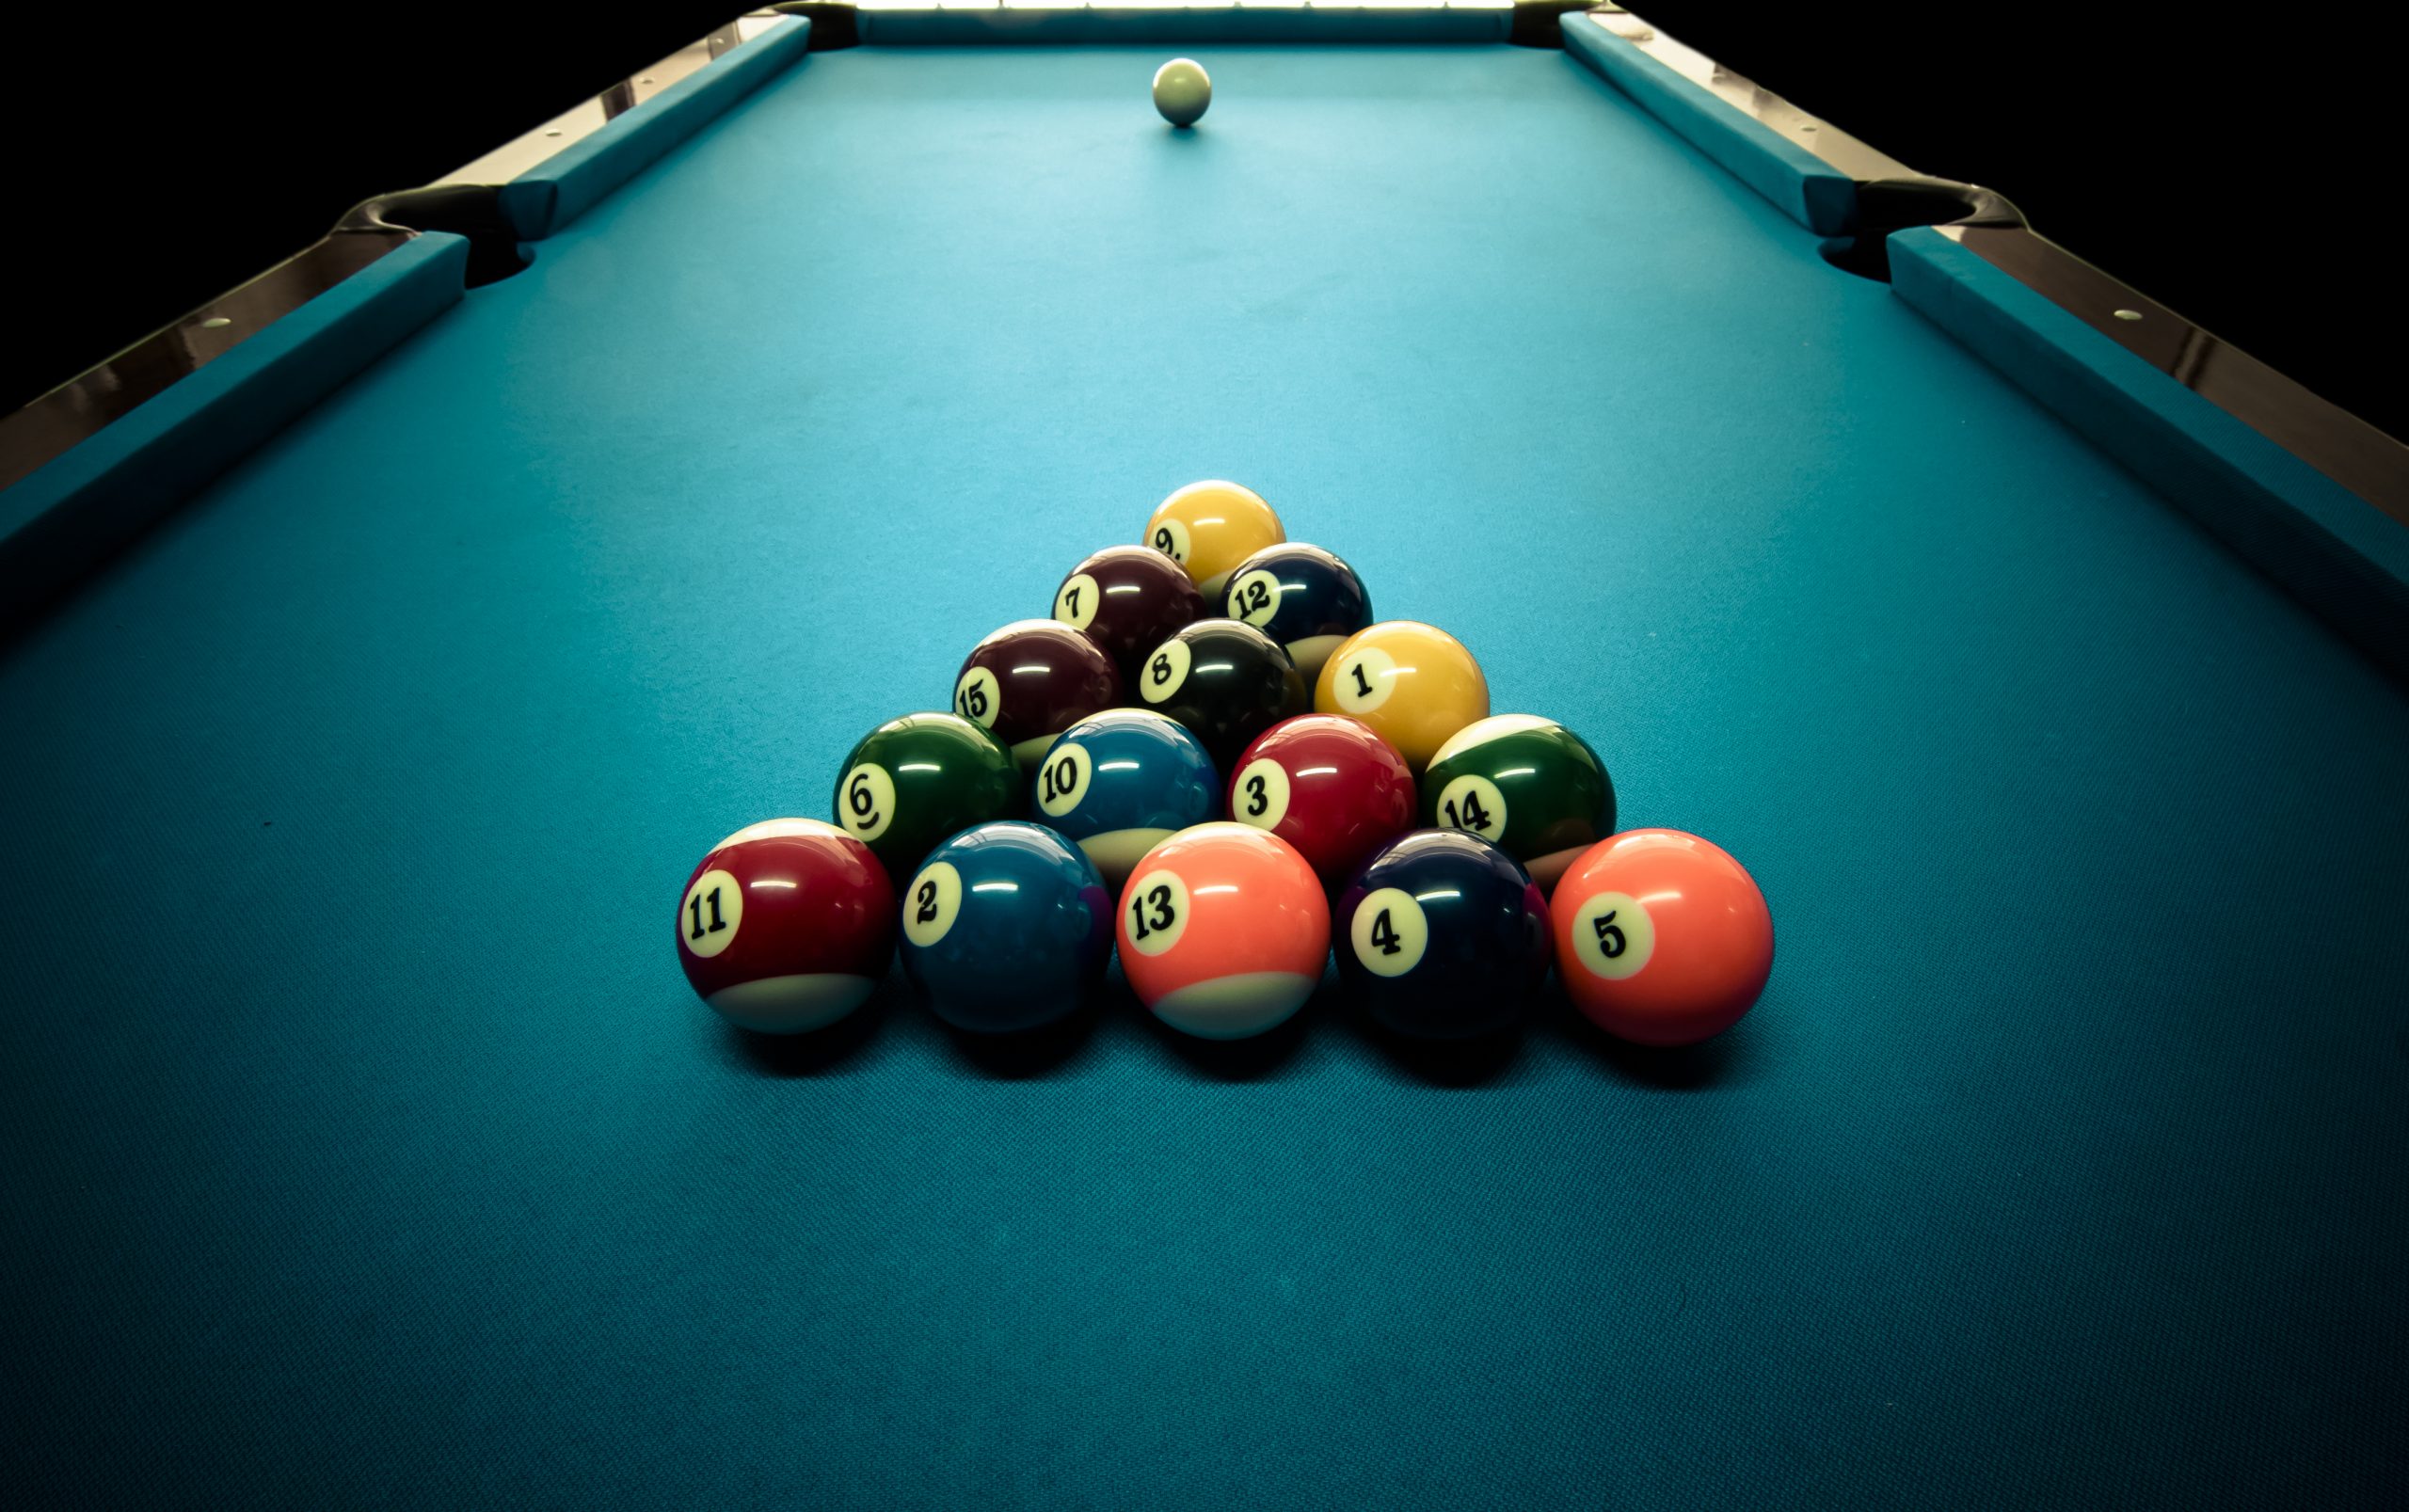 free online pool games 8 ball single player